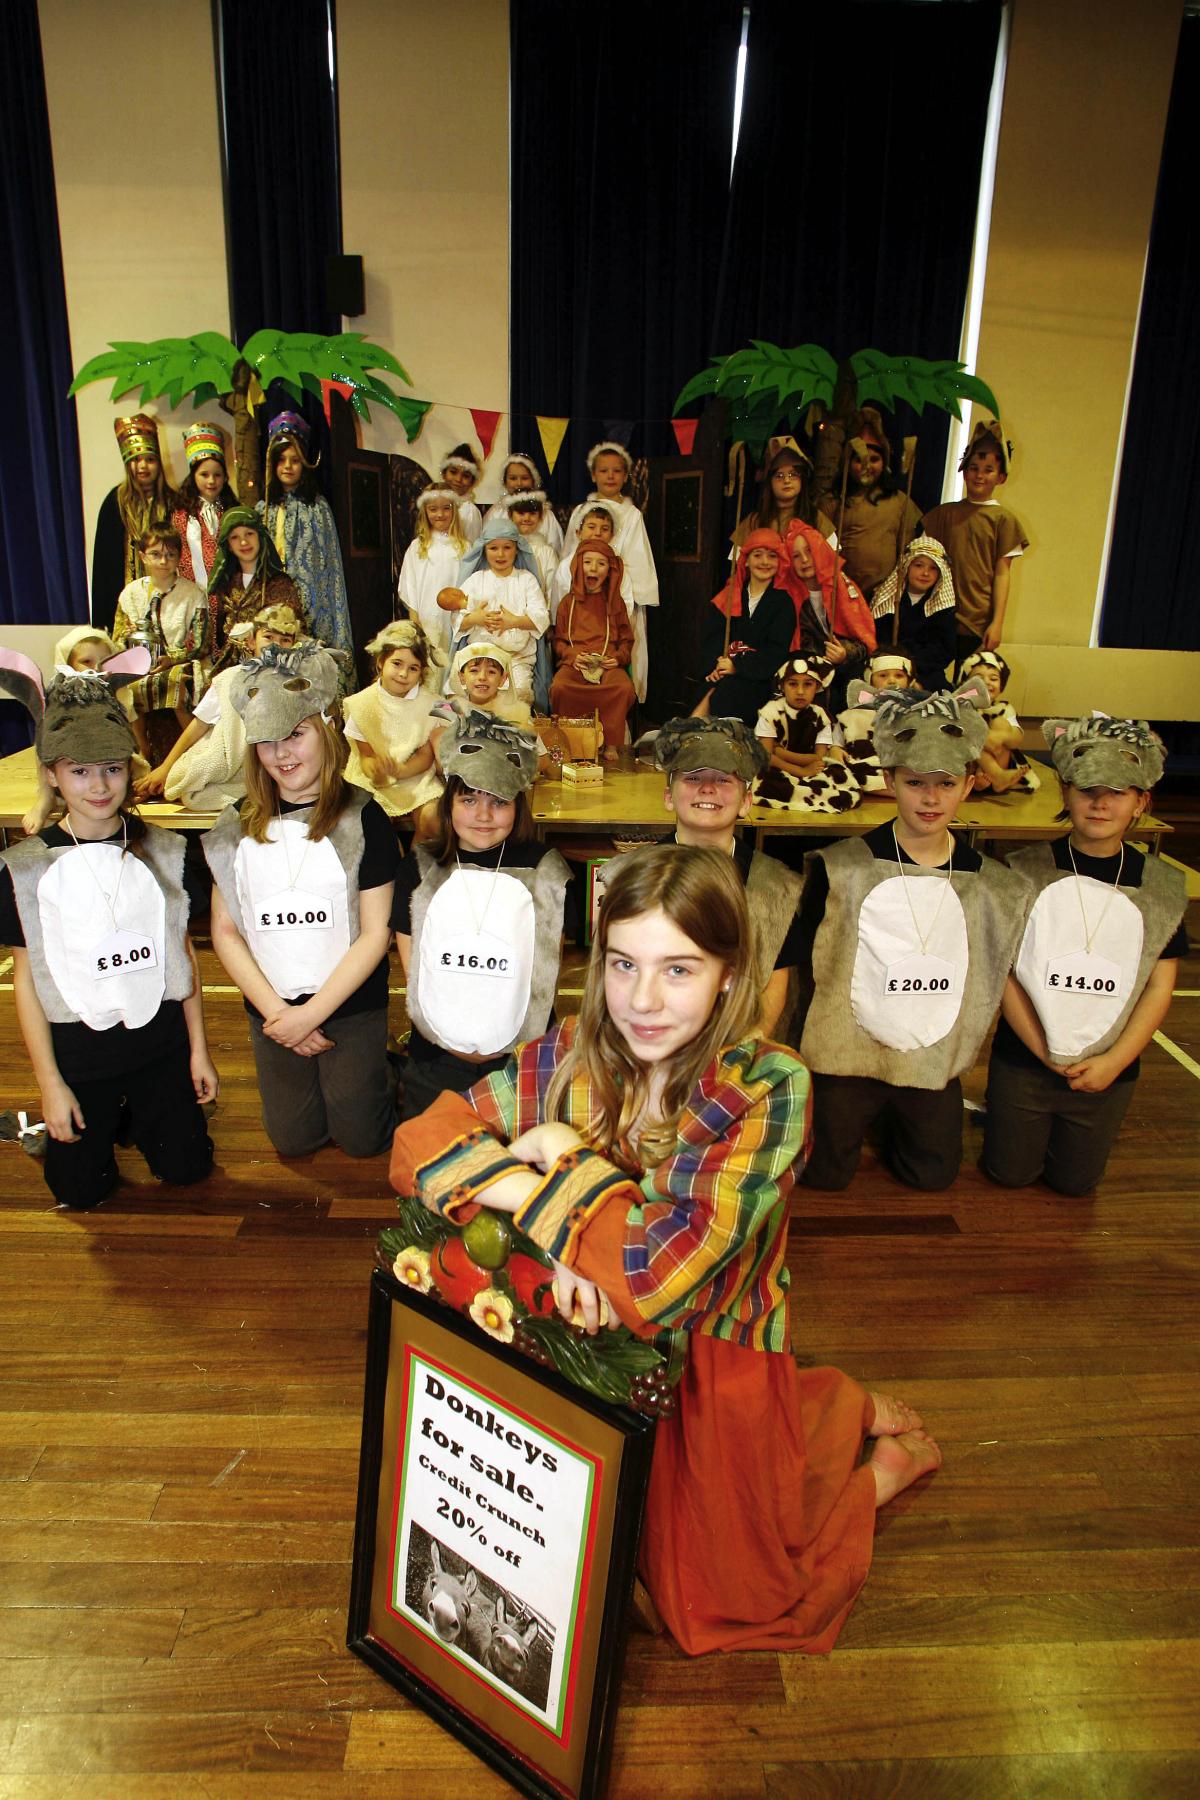 Pupils at Long Lee Primary School taking part in their Christmas production of The Donkey Seller